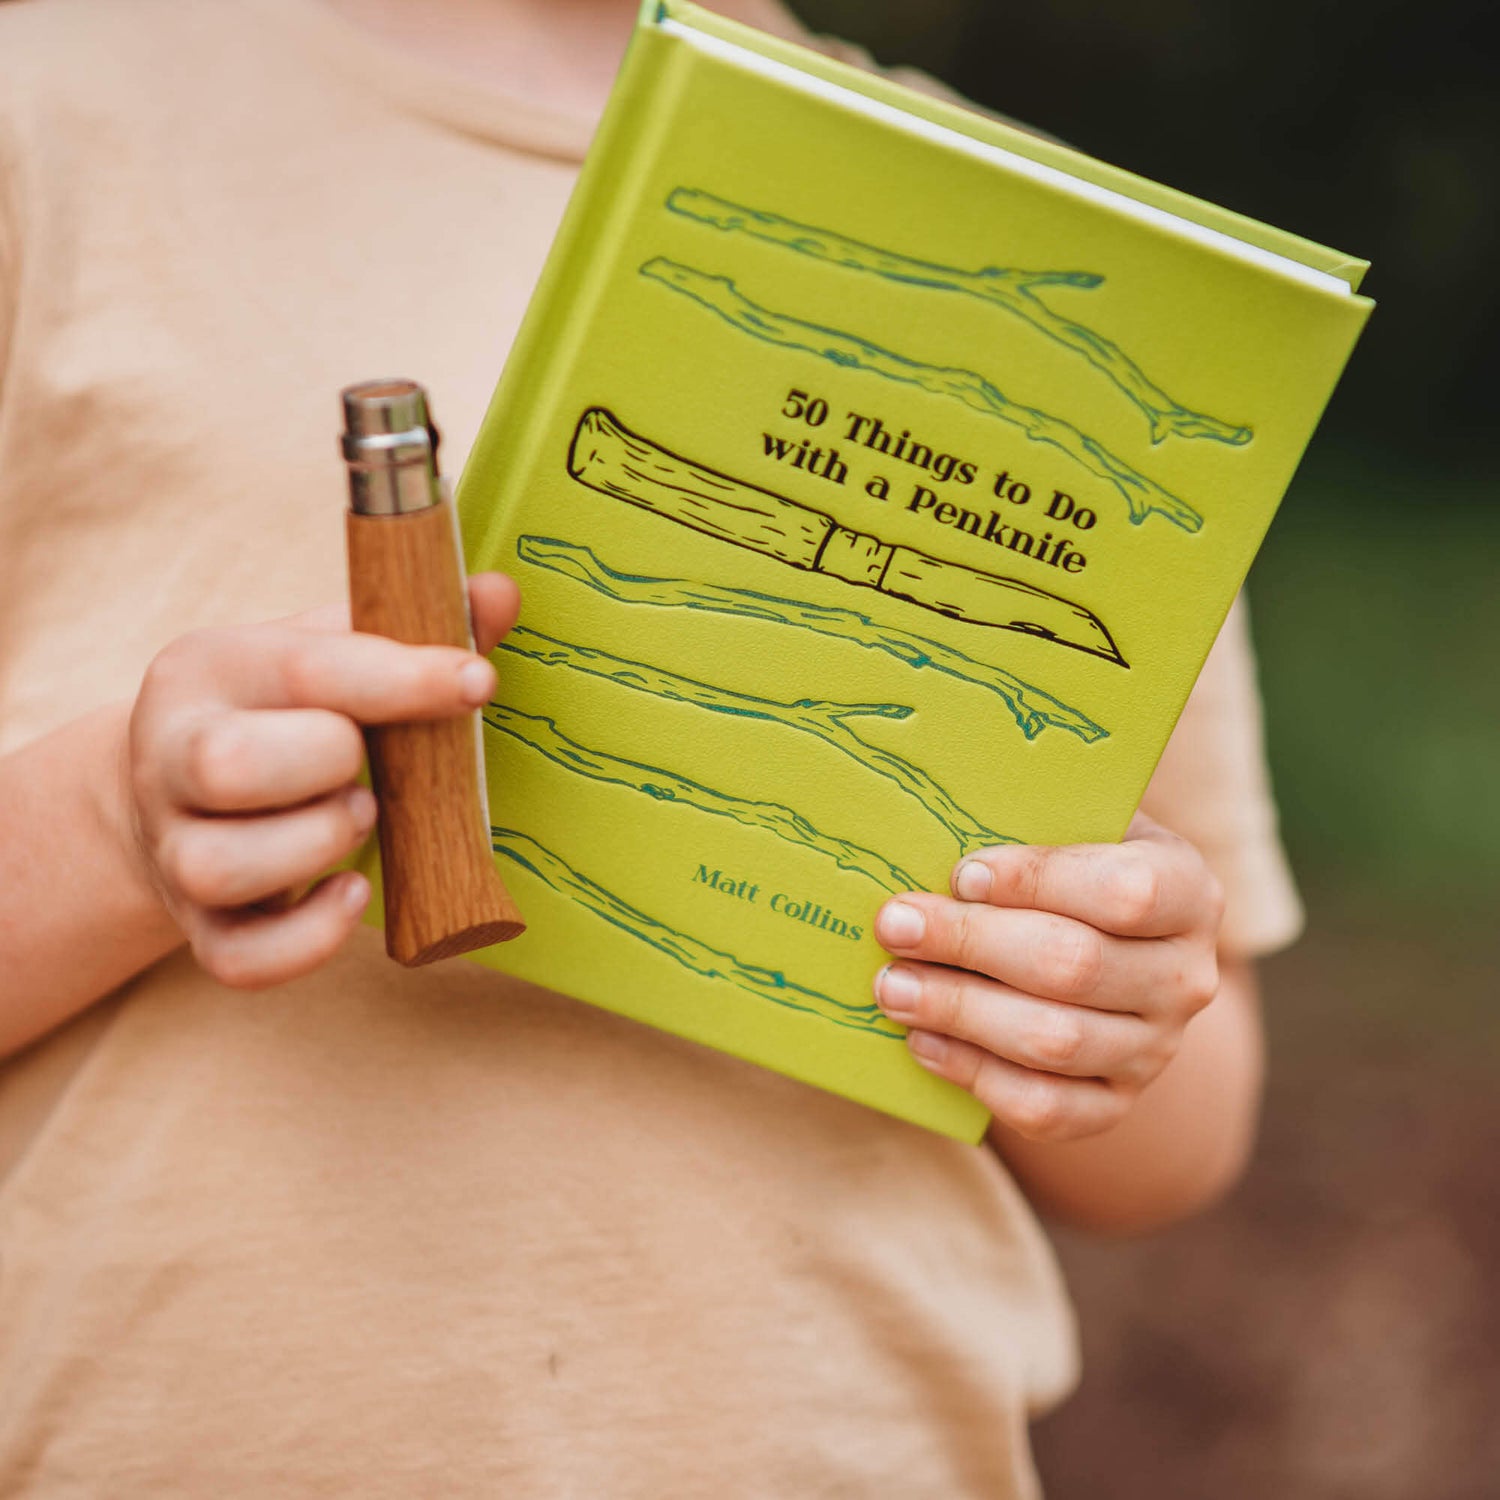 Boy holding 50 Things to do with a Penknife book by Matt Collins with advanced No08 wood whittling knife by Opinel, sold by Your Wild Books in a bundle for 13% off